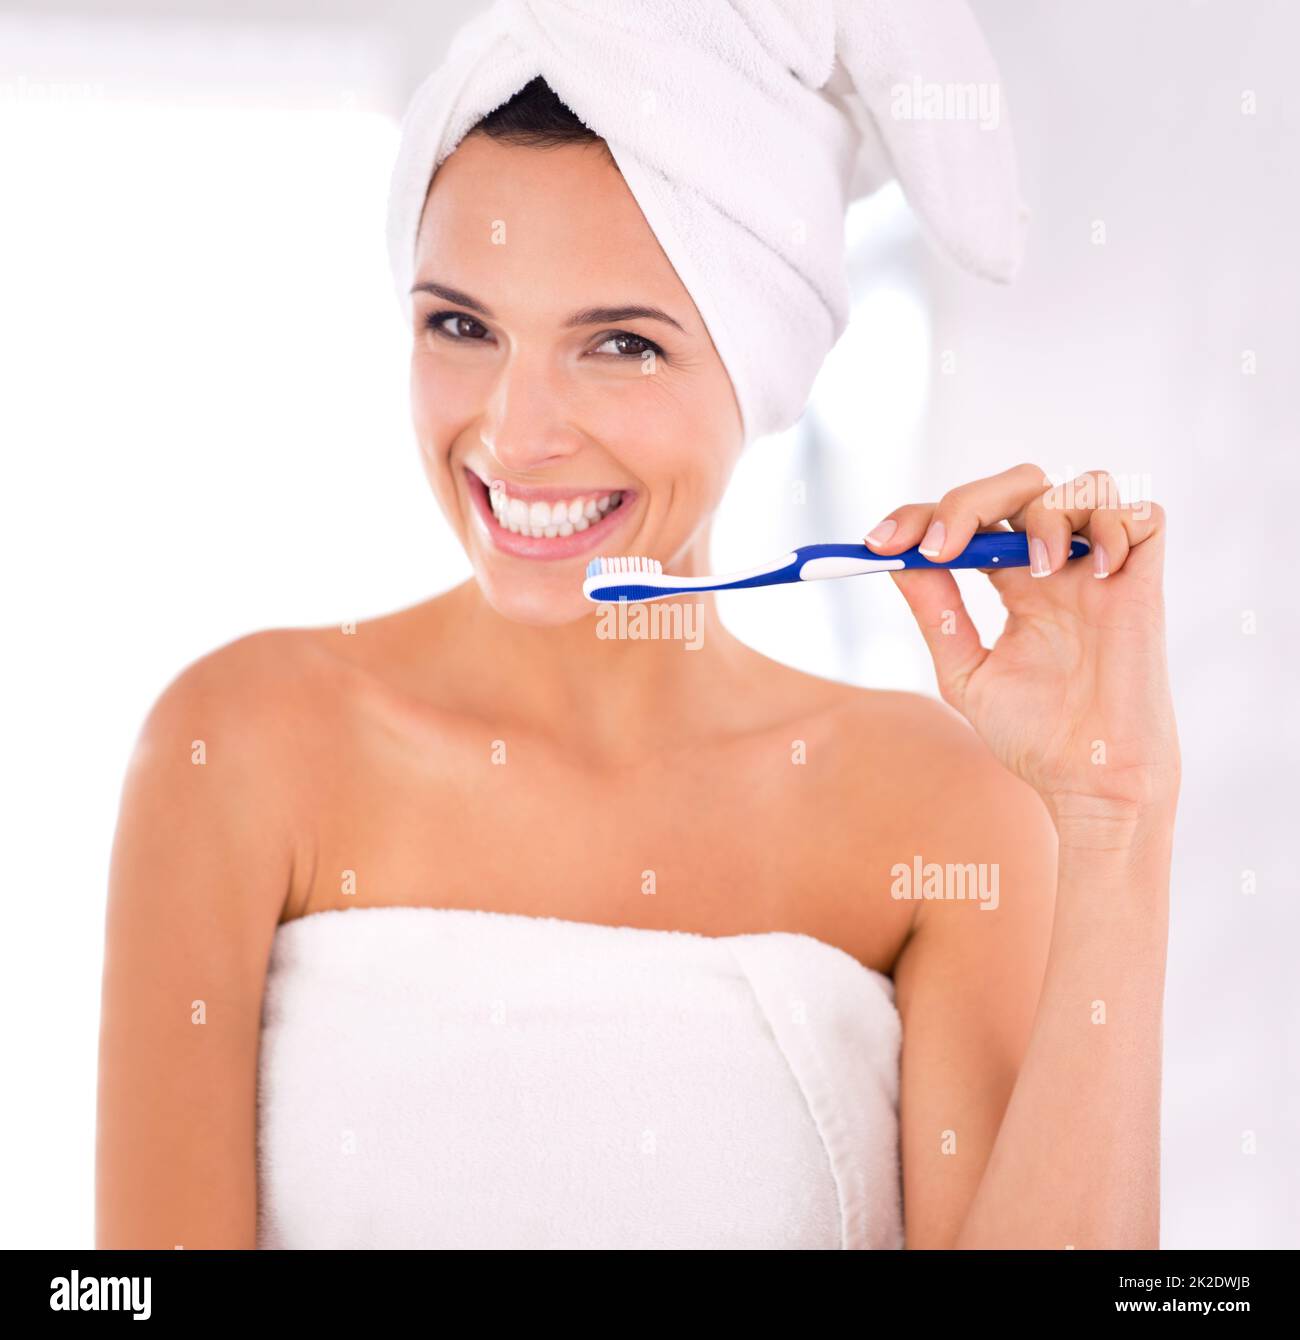 Shiny teeth to match her perfect skin. Portrait of a beautiful woman about to brush her teeth. Stock Photo